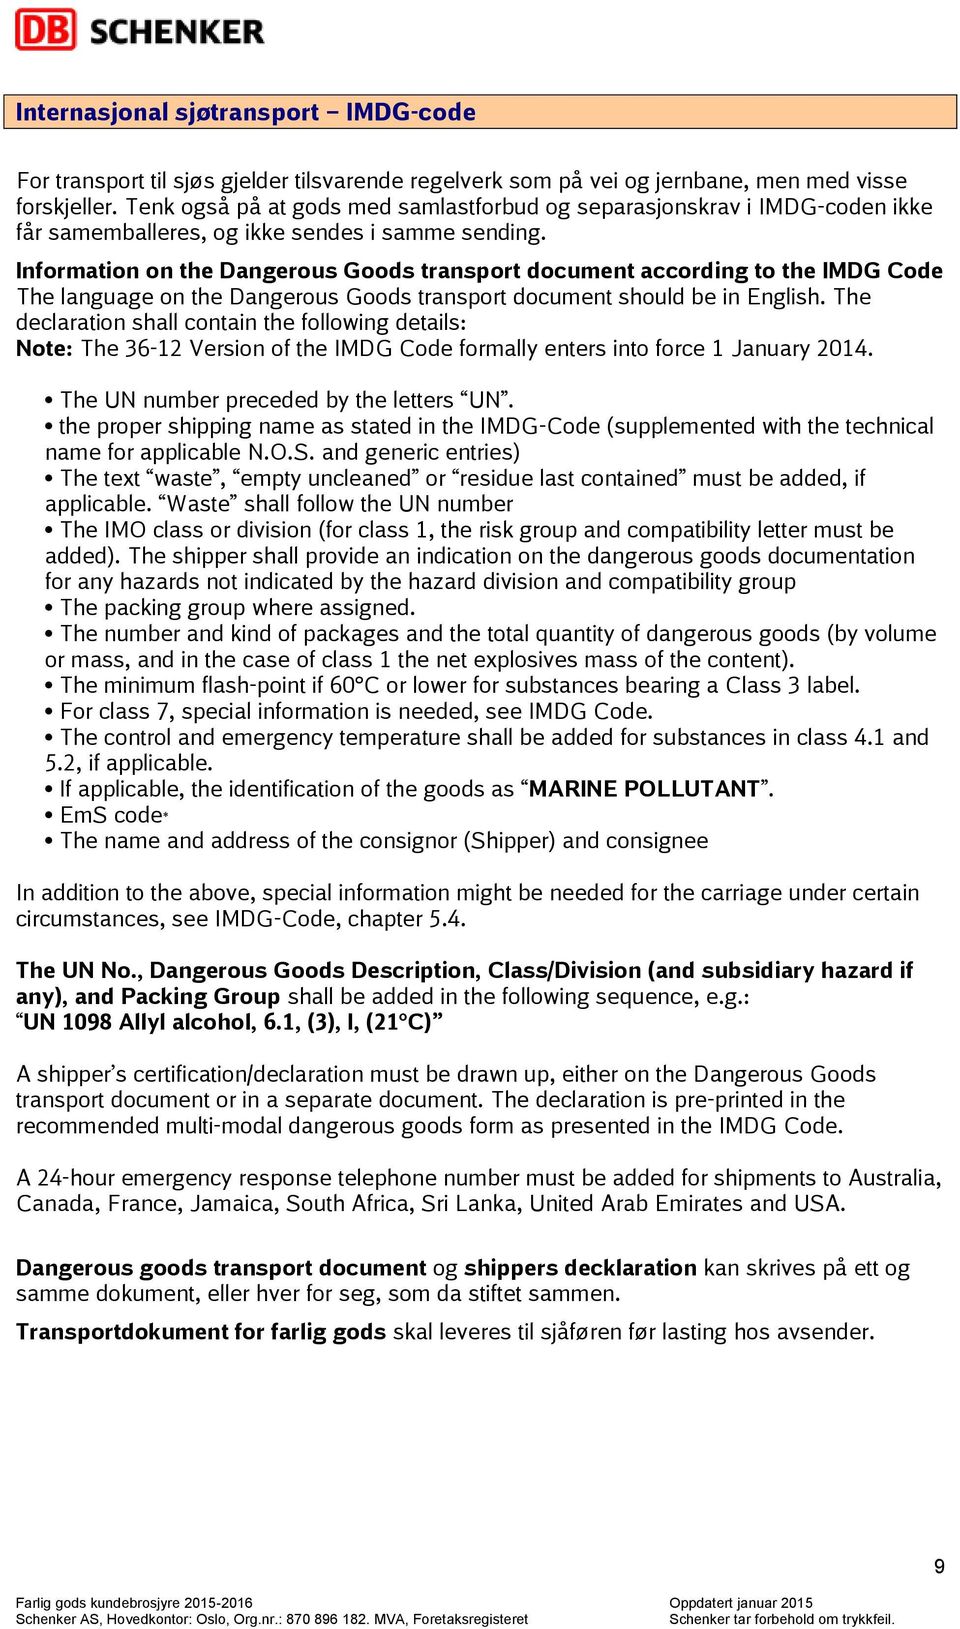 Information on the Dangerous Goods transport document according to the IMDG Code The language on the Dangerous Goods transport document should be in English.